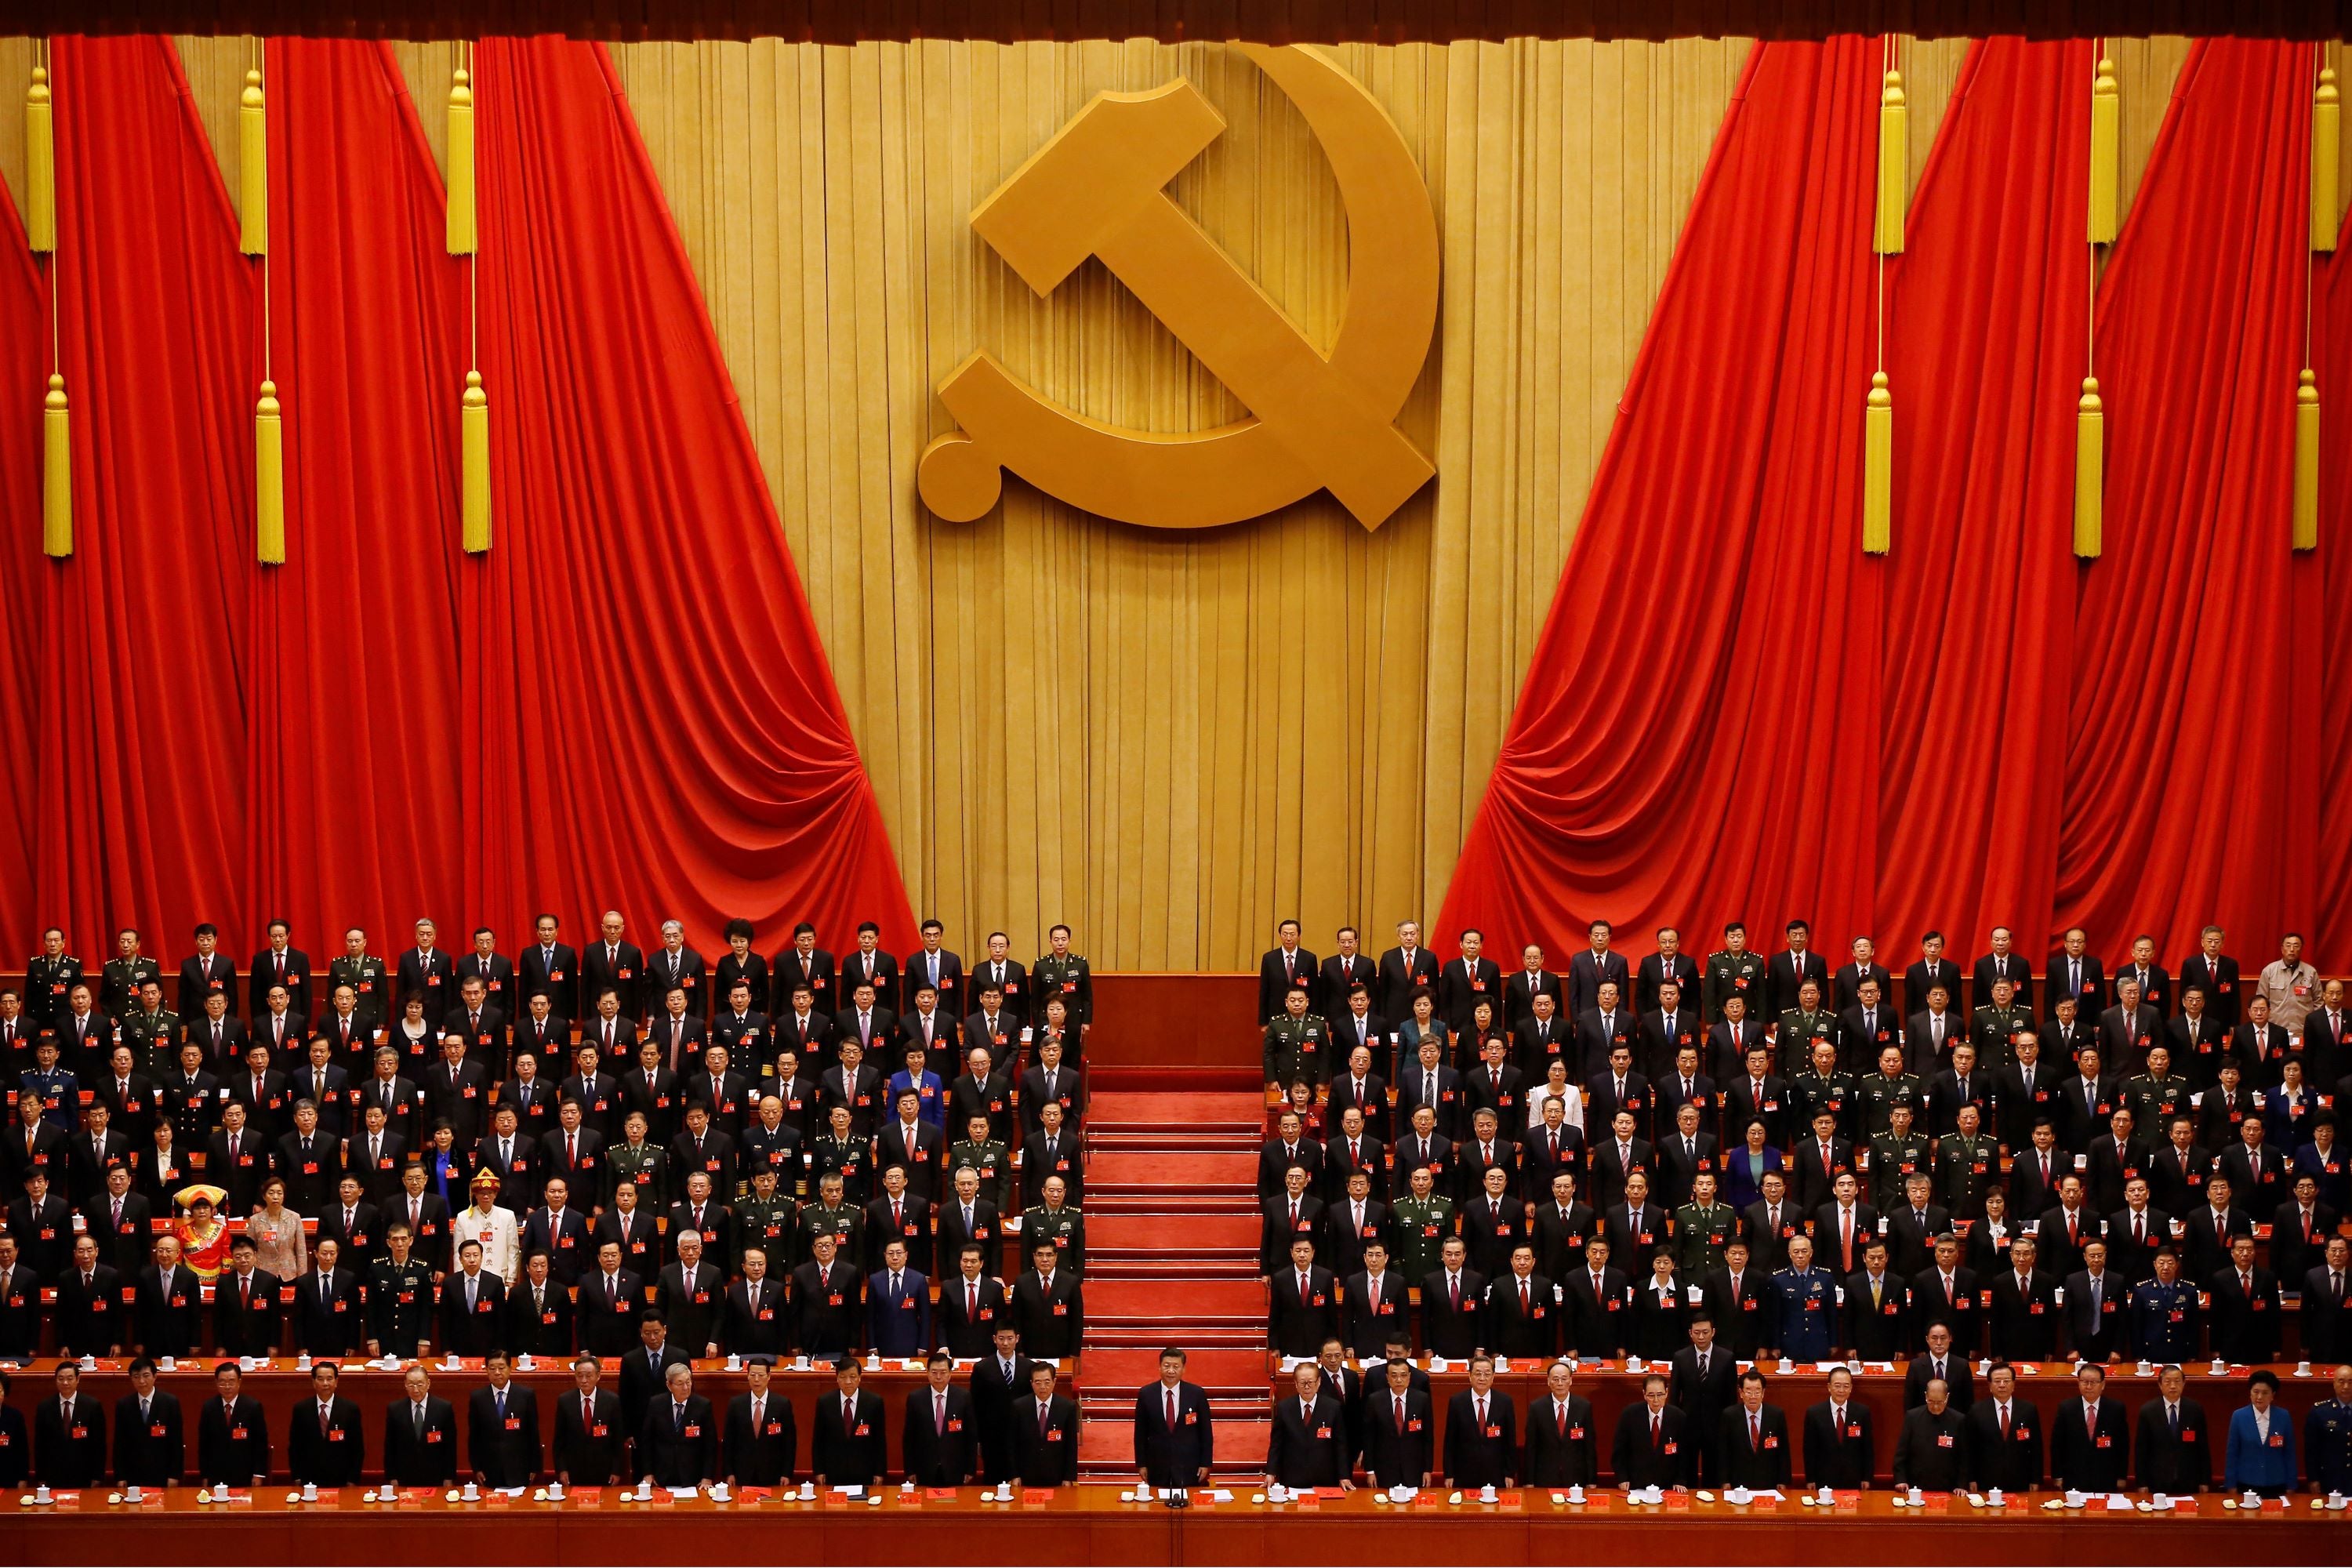 Chinese President Xi Jinping, front row center, stands with other officials